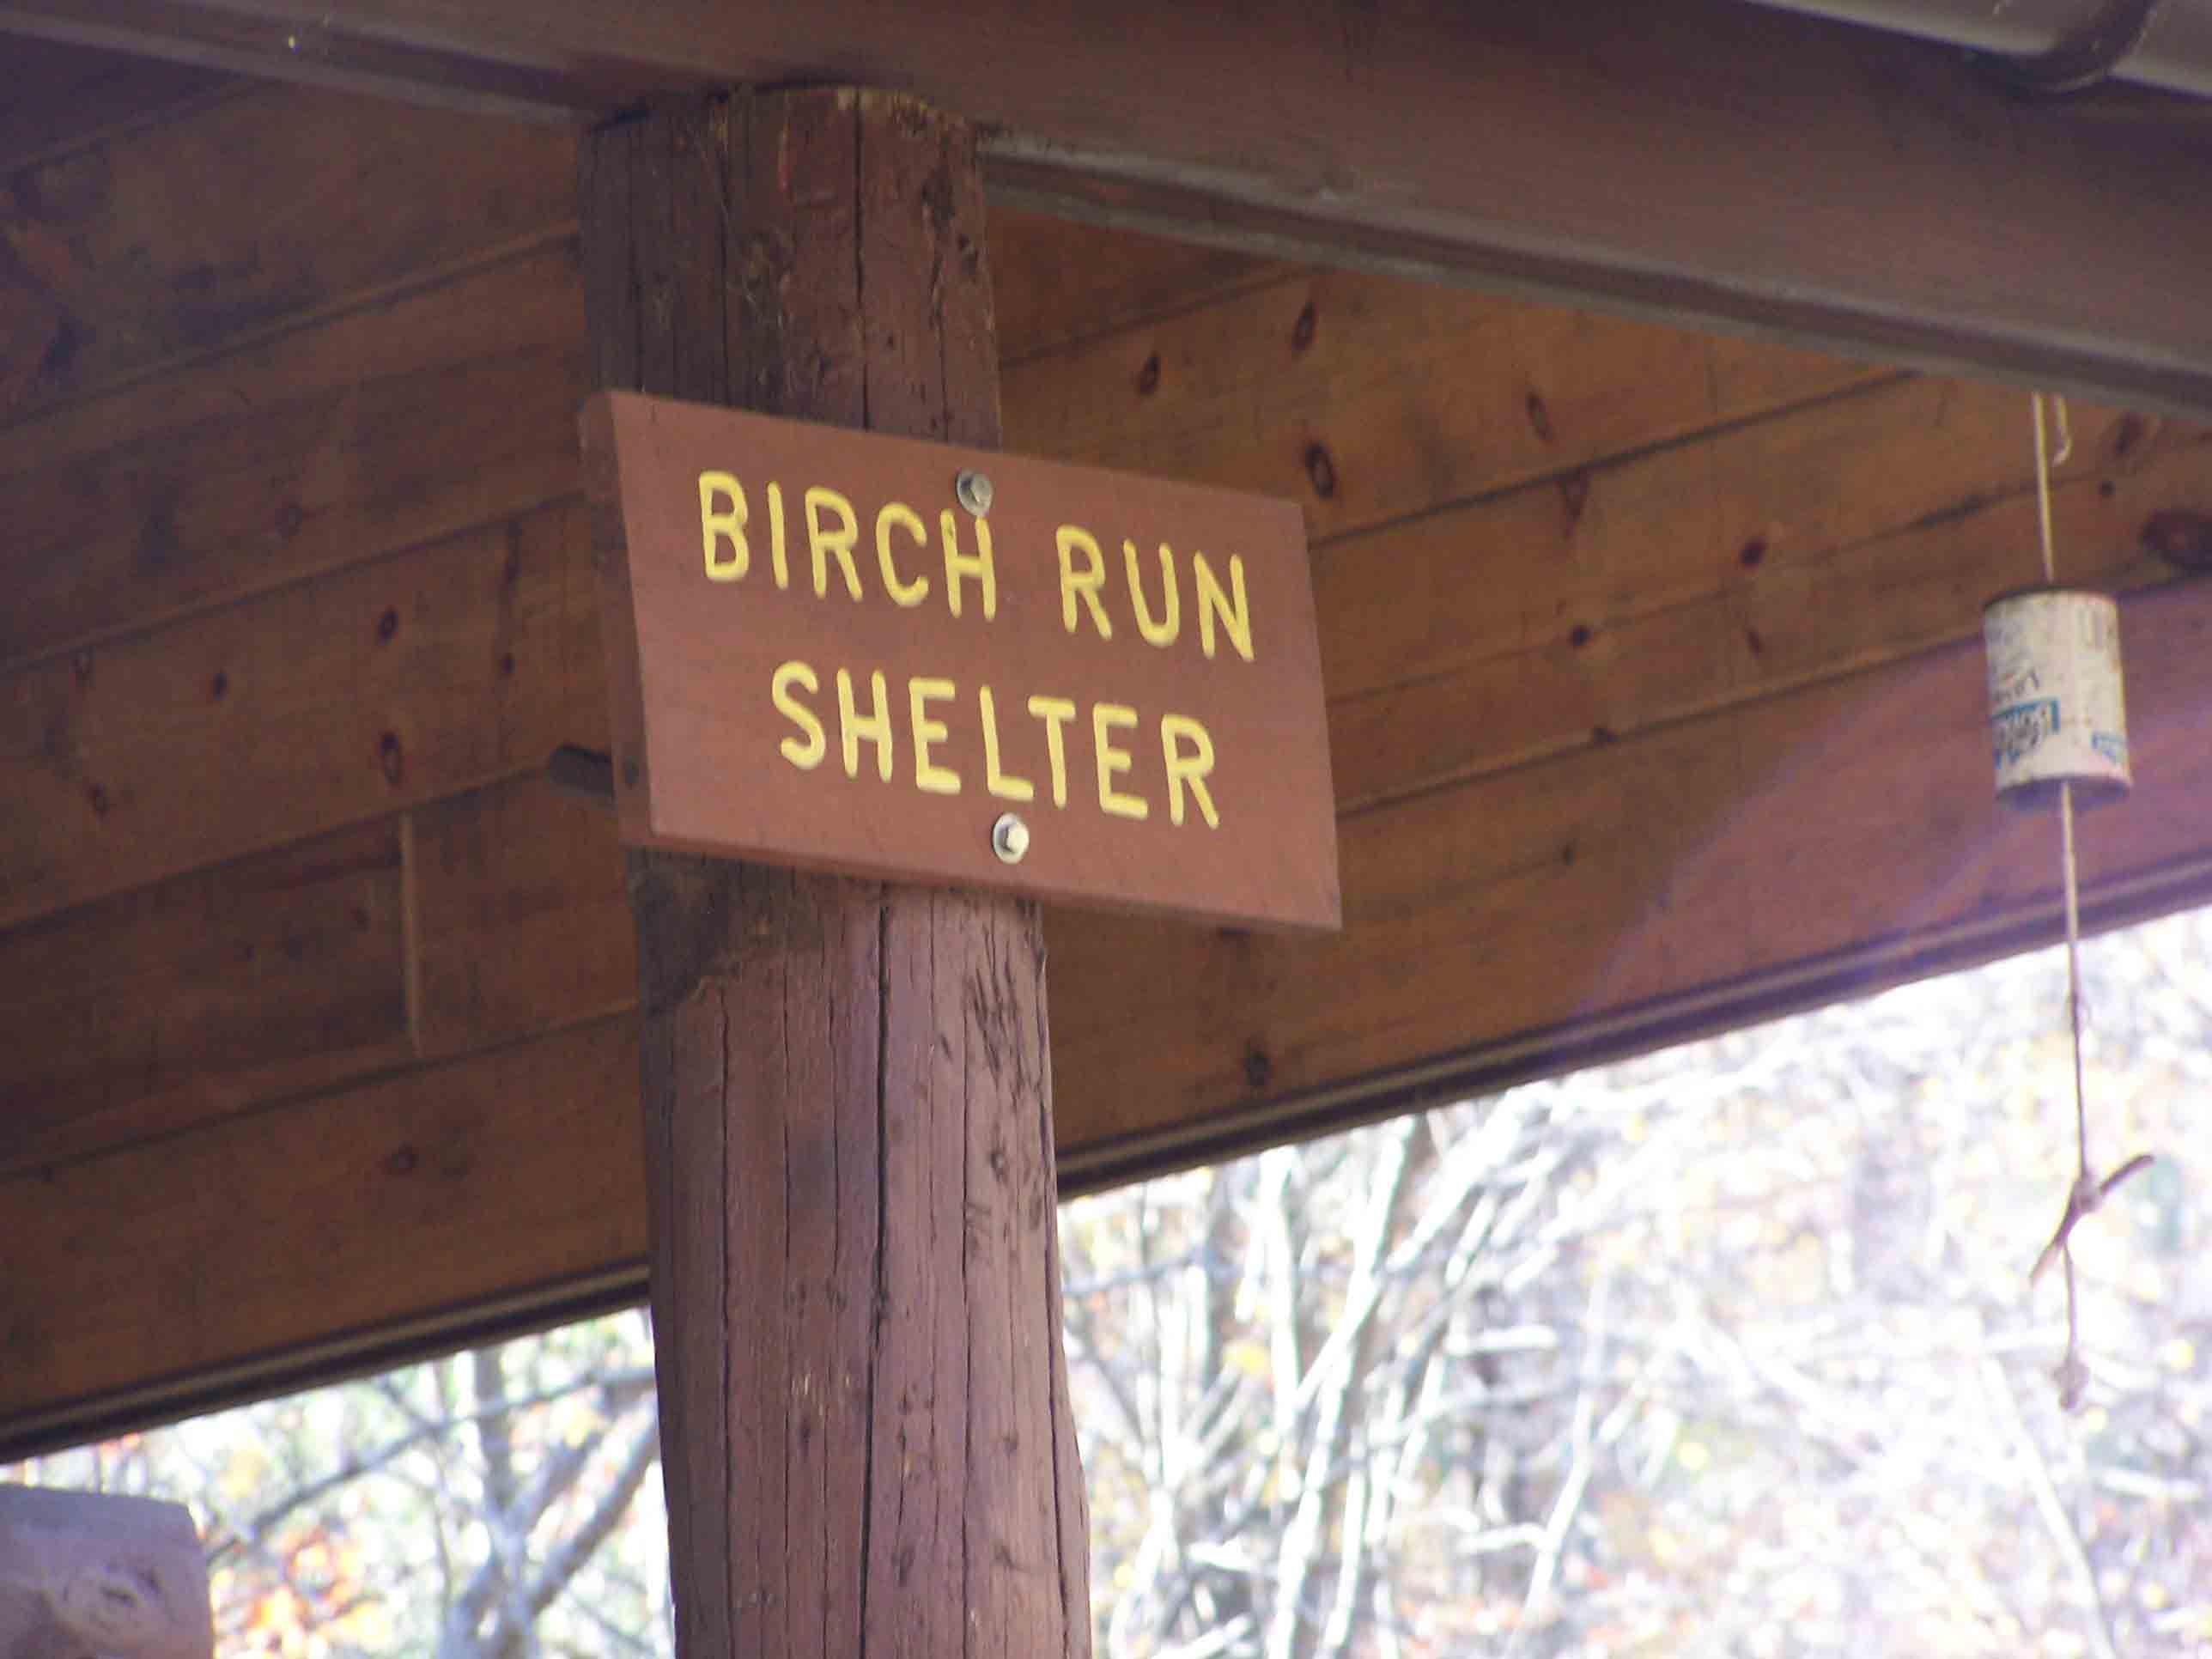 Birch Run Shelter mm 9.7 Courtesy at@rohland.org